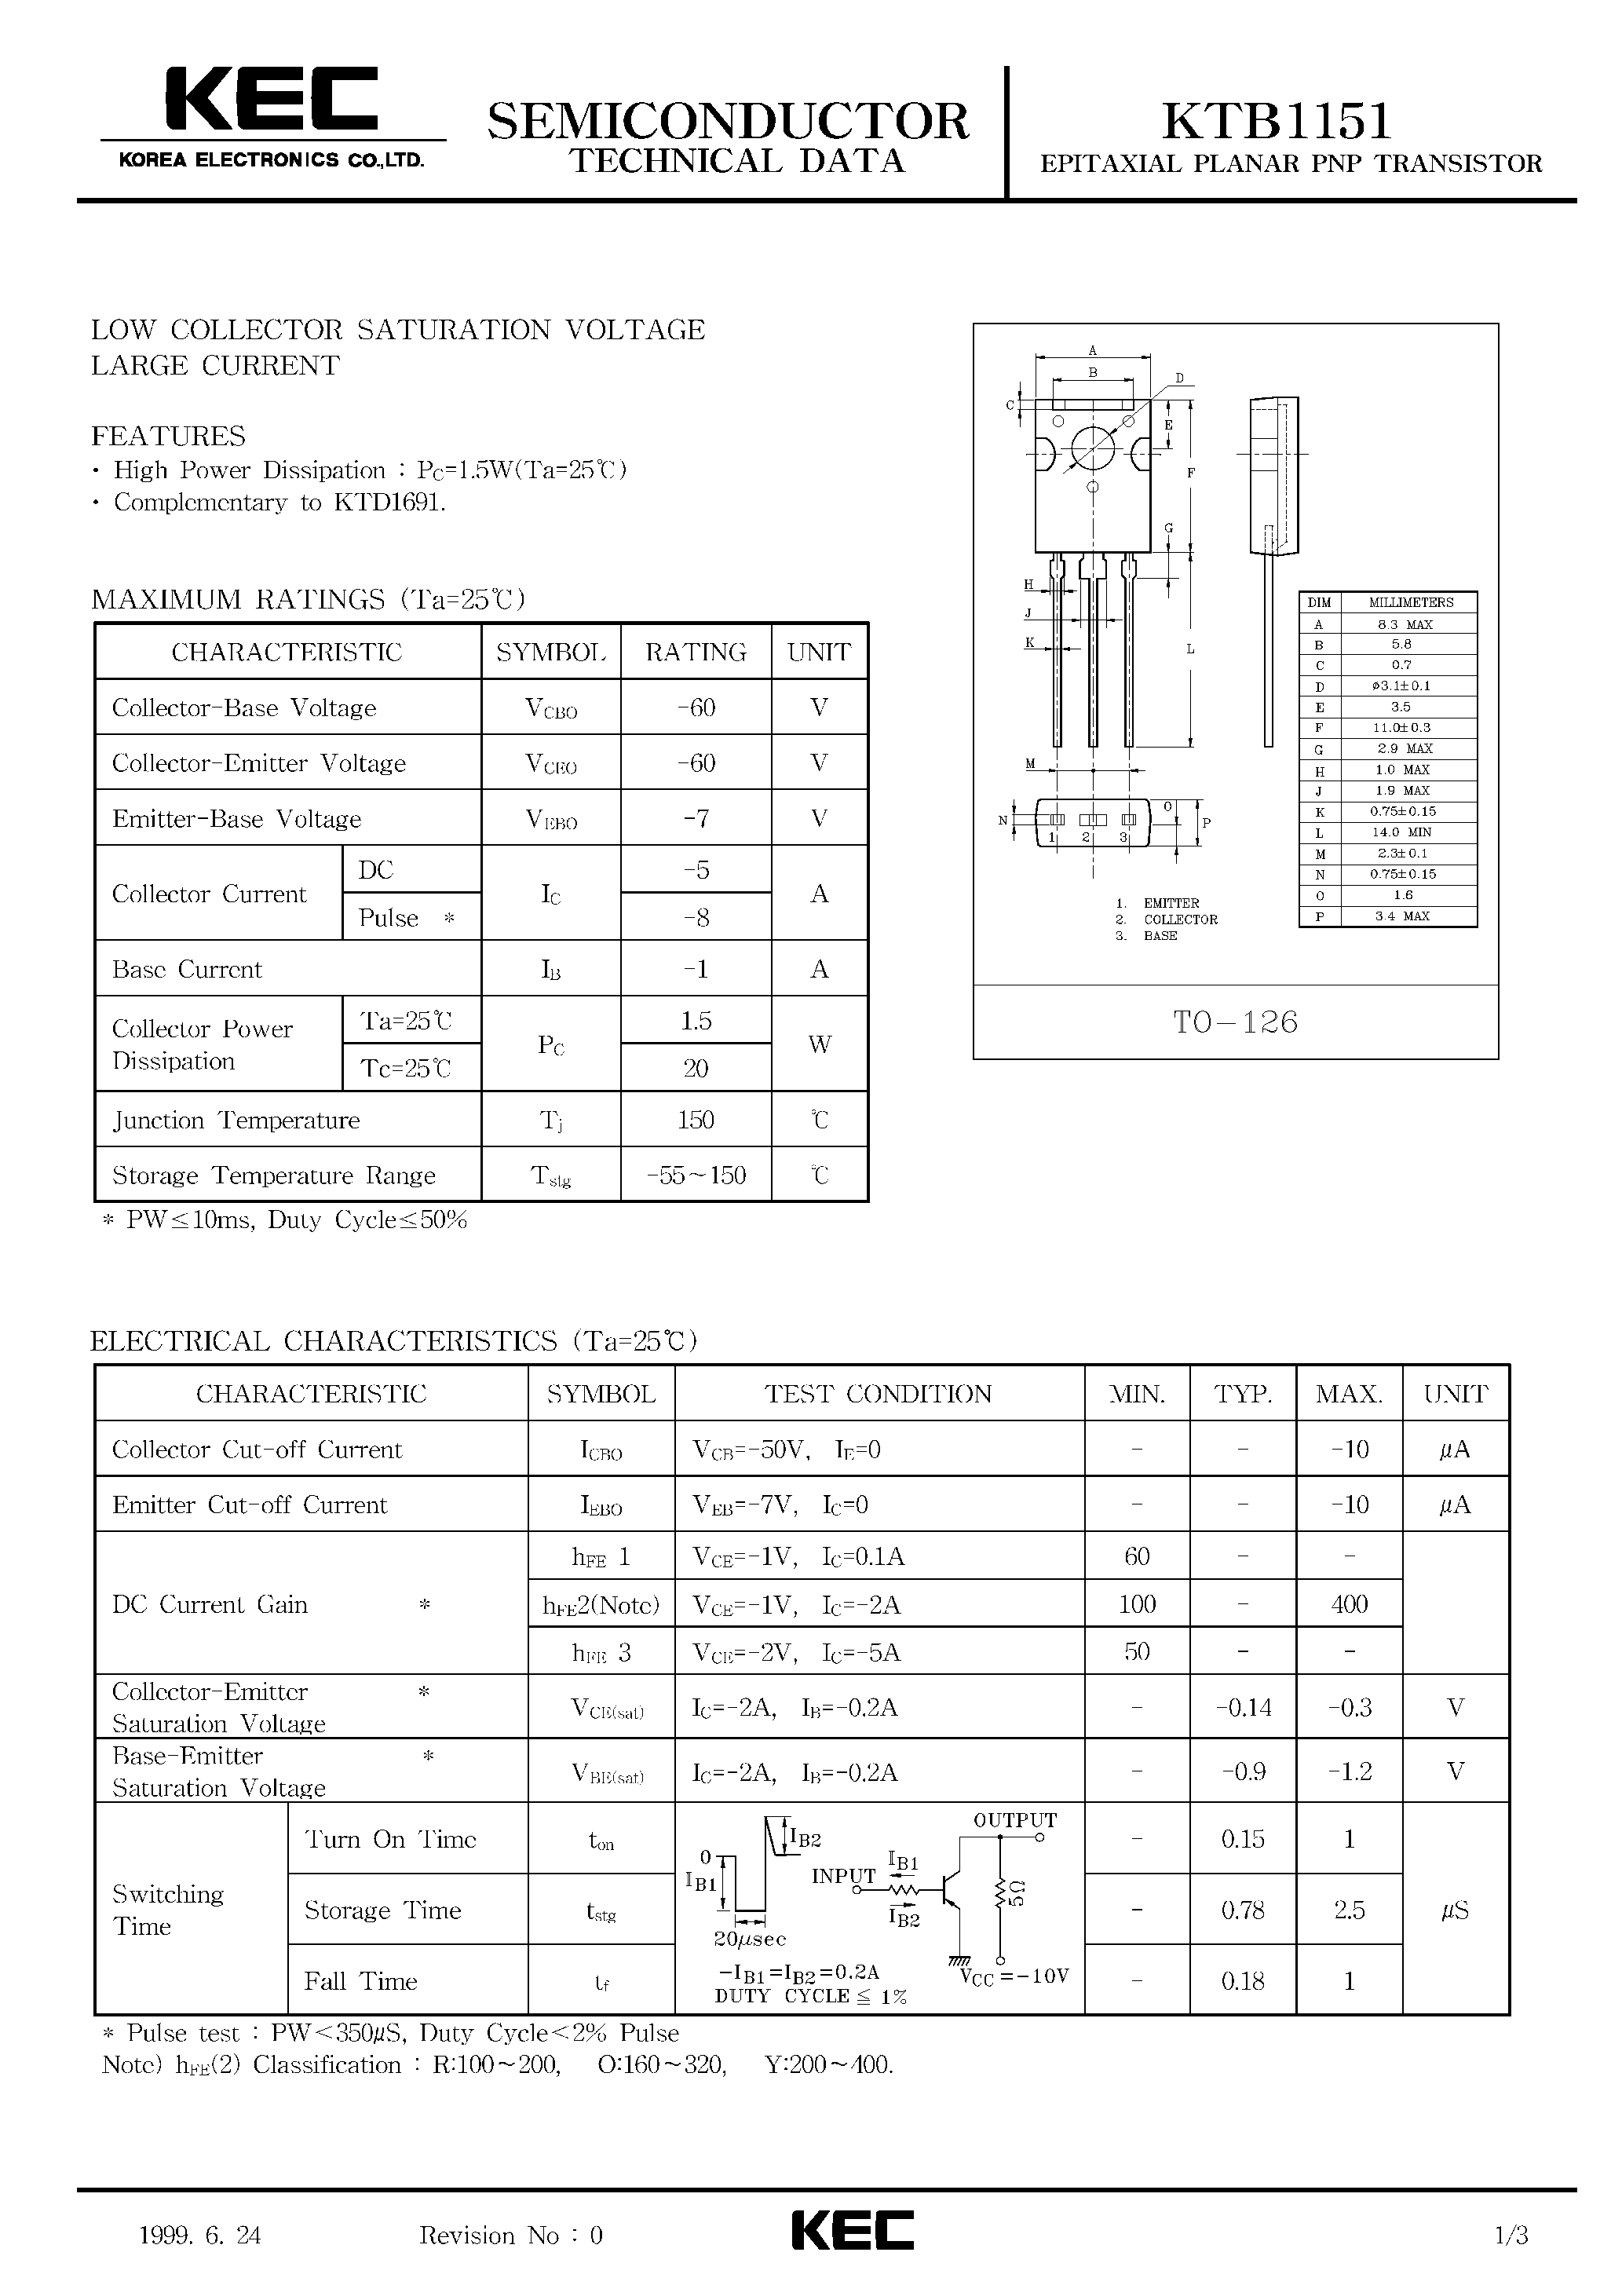 Datasheet KTB1151 - EPITAXIAL PLANAR PNP TRANSISTOR (LOW COLLECTOR SATURATION VOLTAGE LARGE CURRENT) page 1